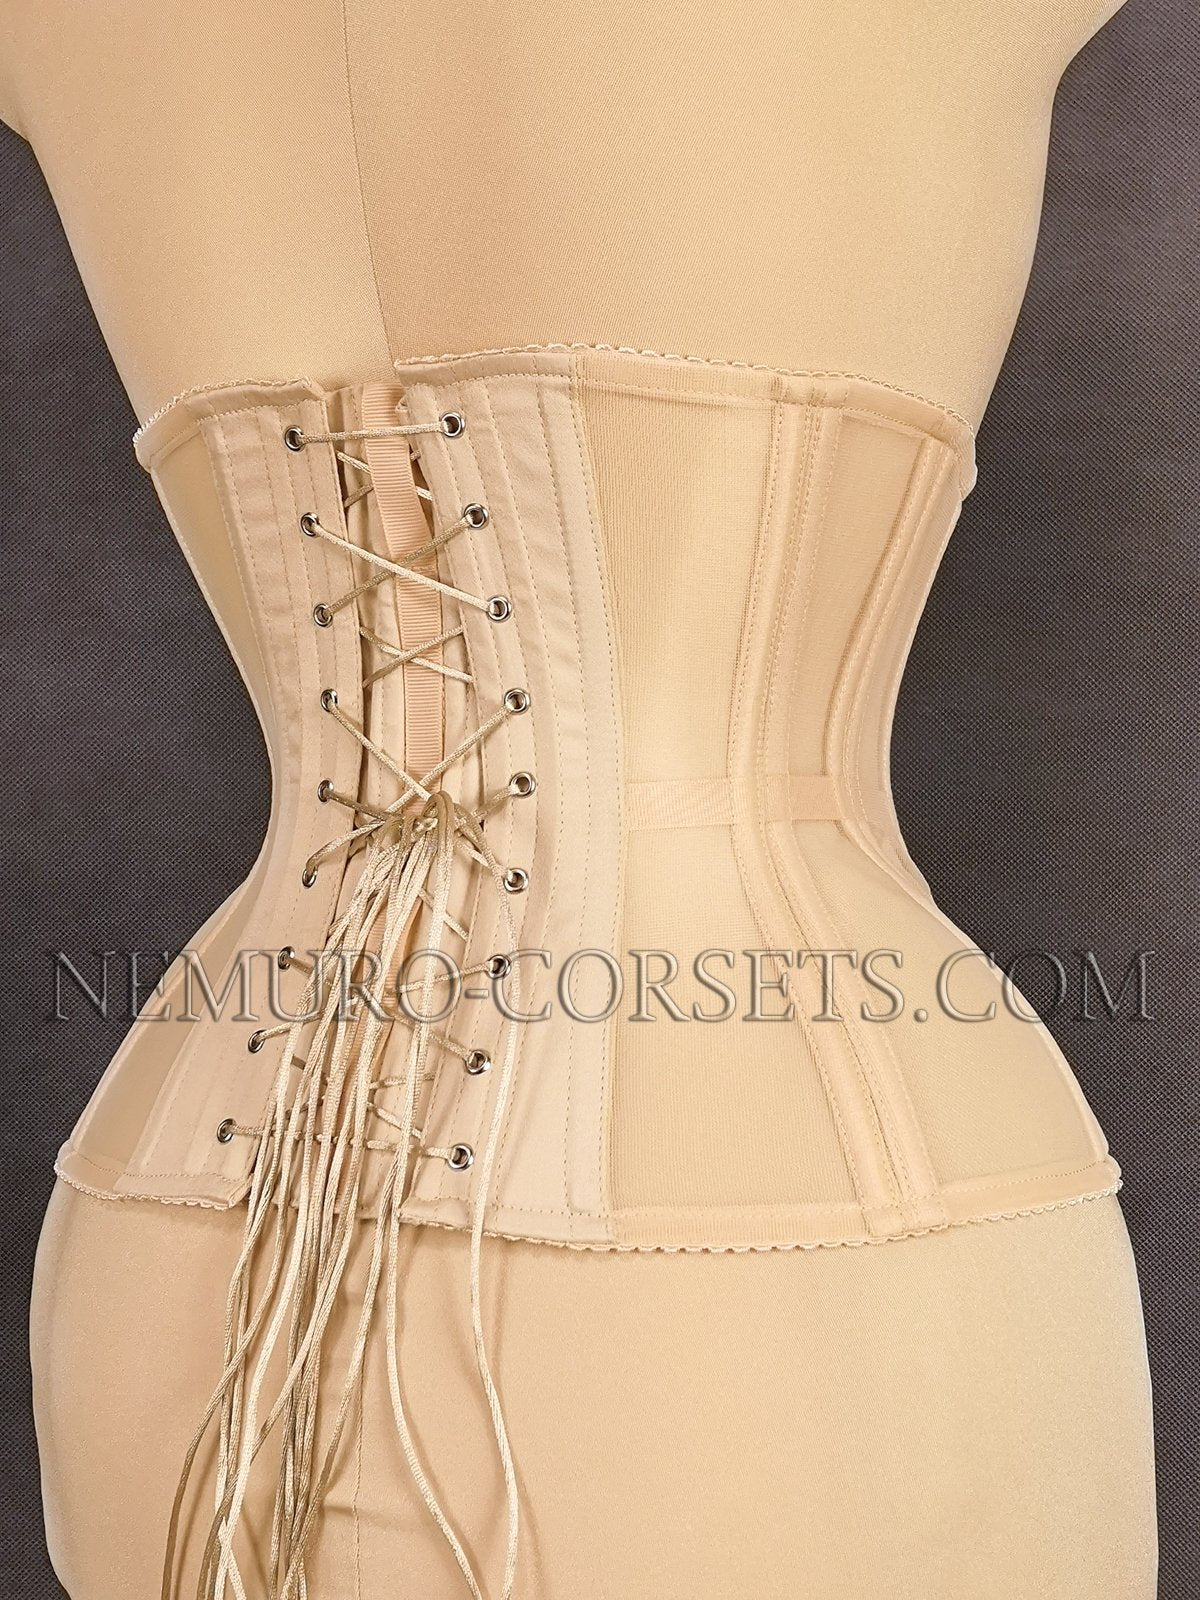 Stealthing – The art of concealing your corset under clothing